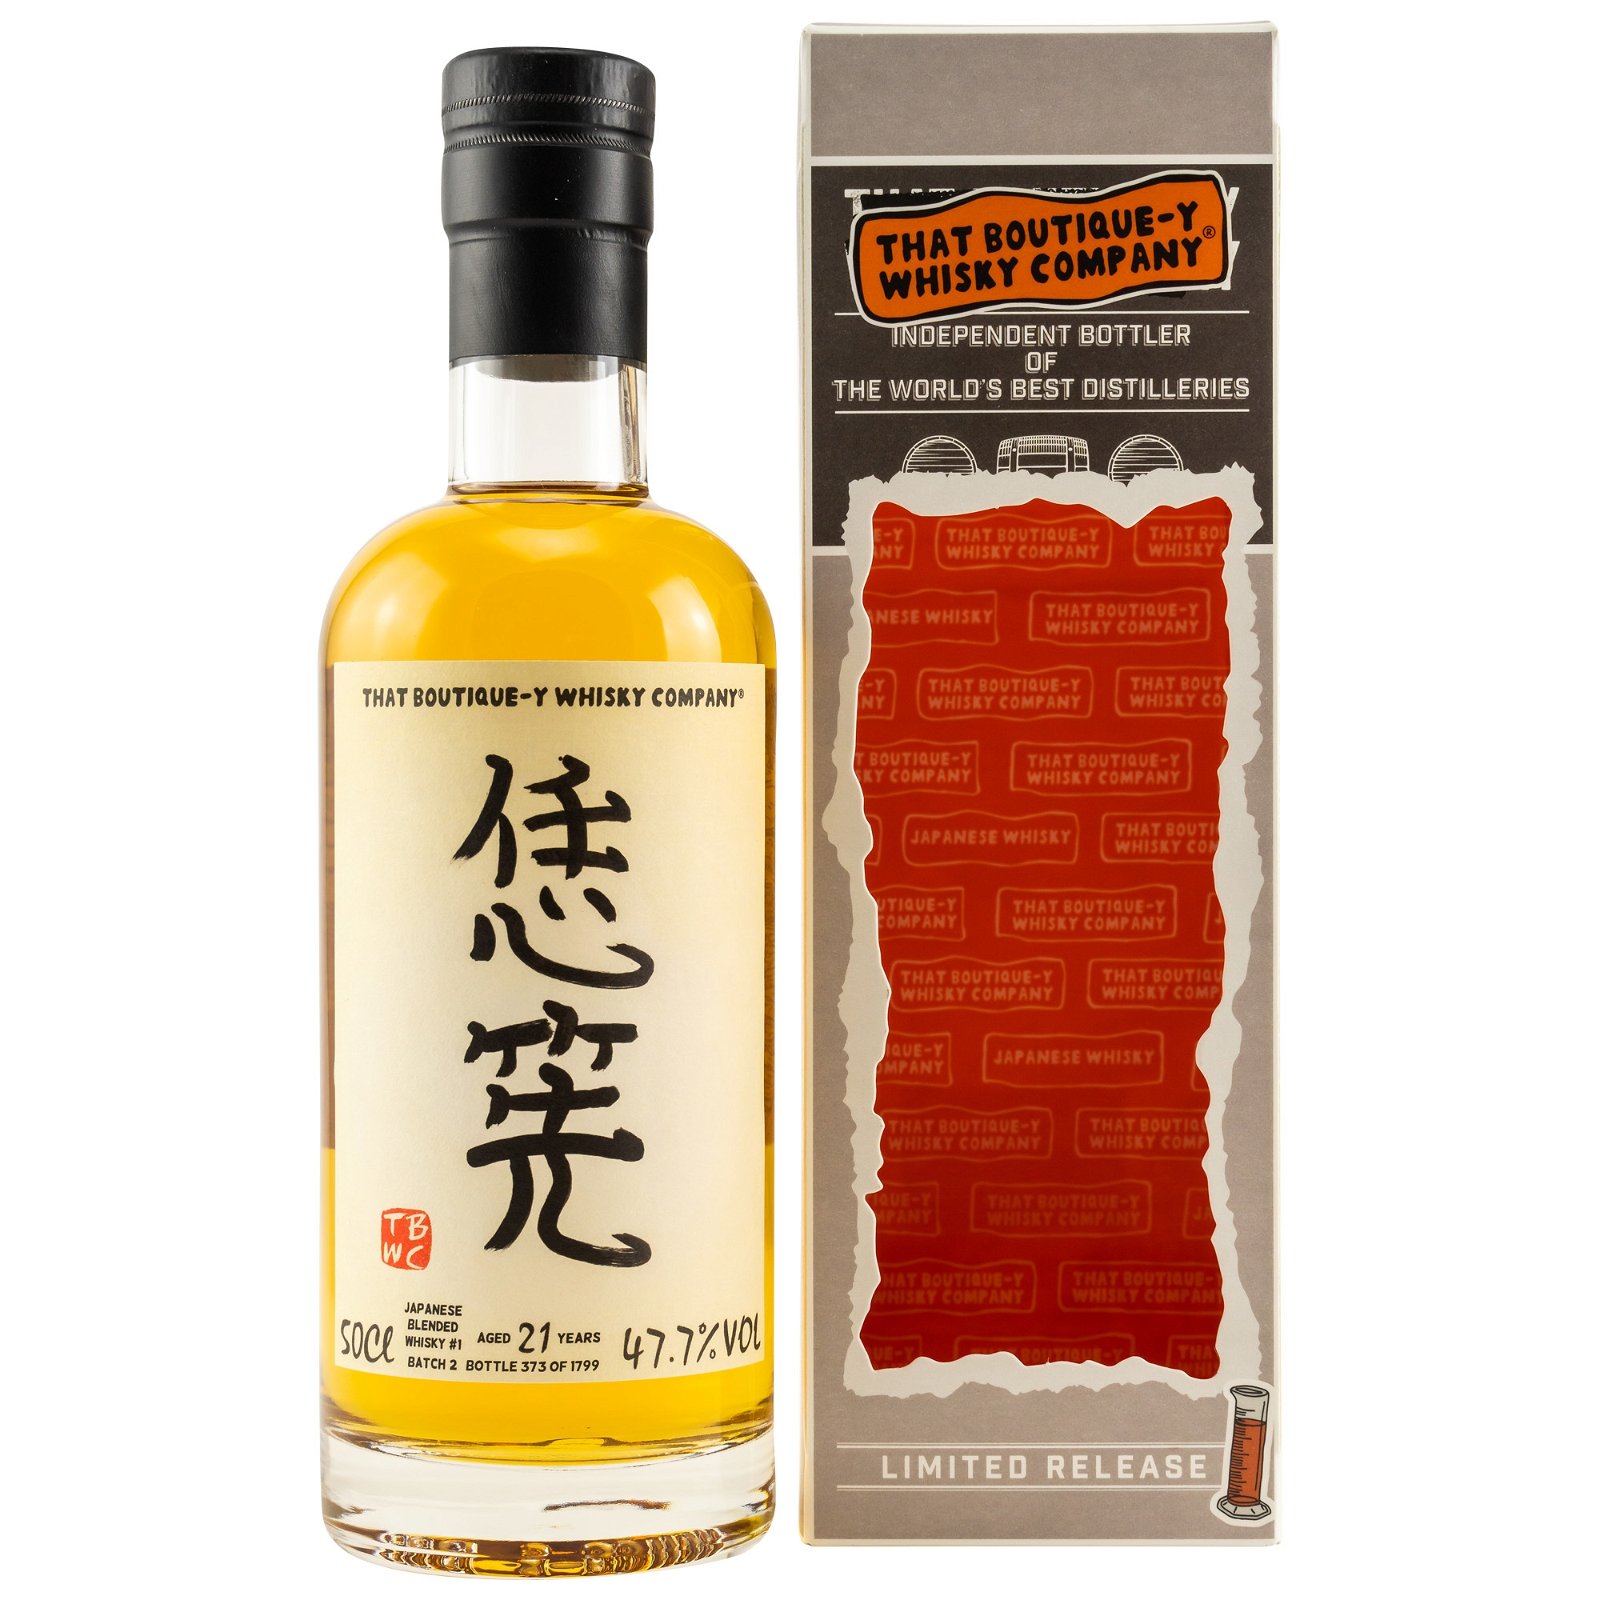 Japanese Blended Whisky #1 21 Jahre Batch 2 (That Boutique-y Whisky Company)